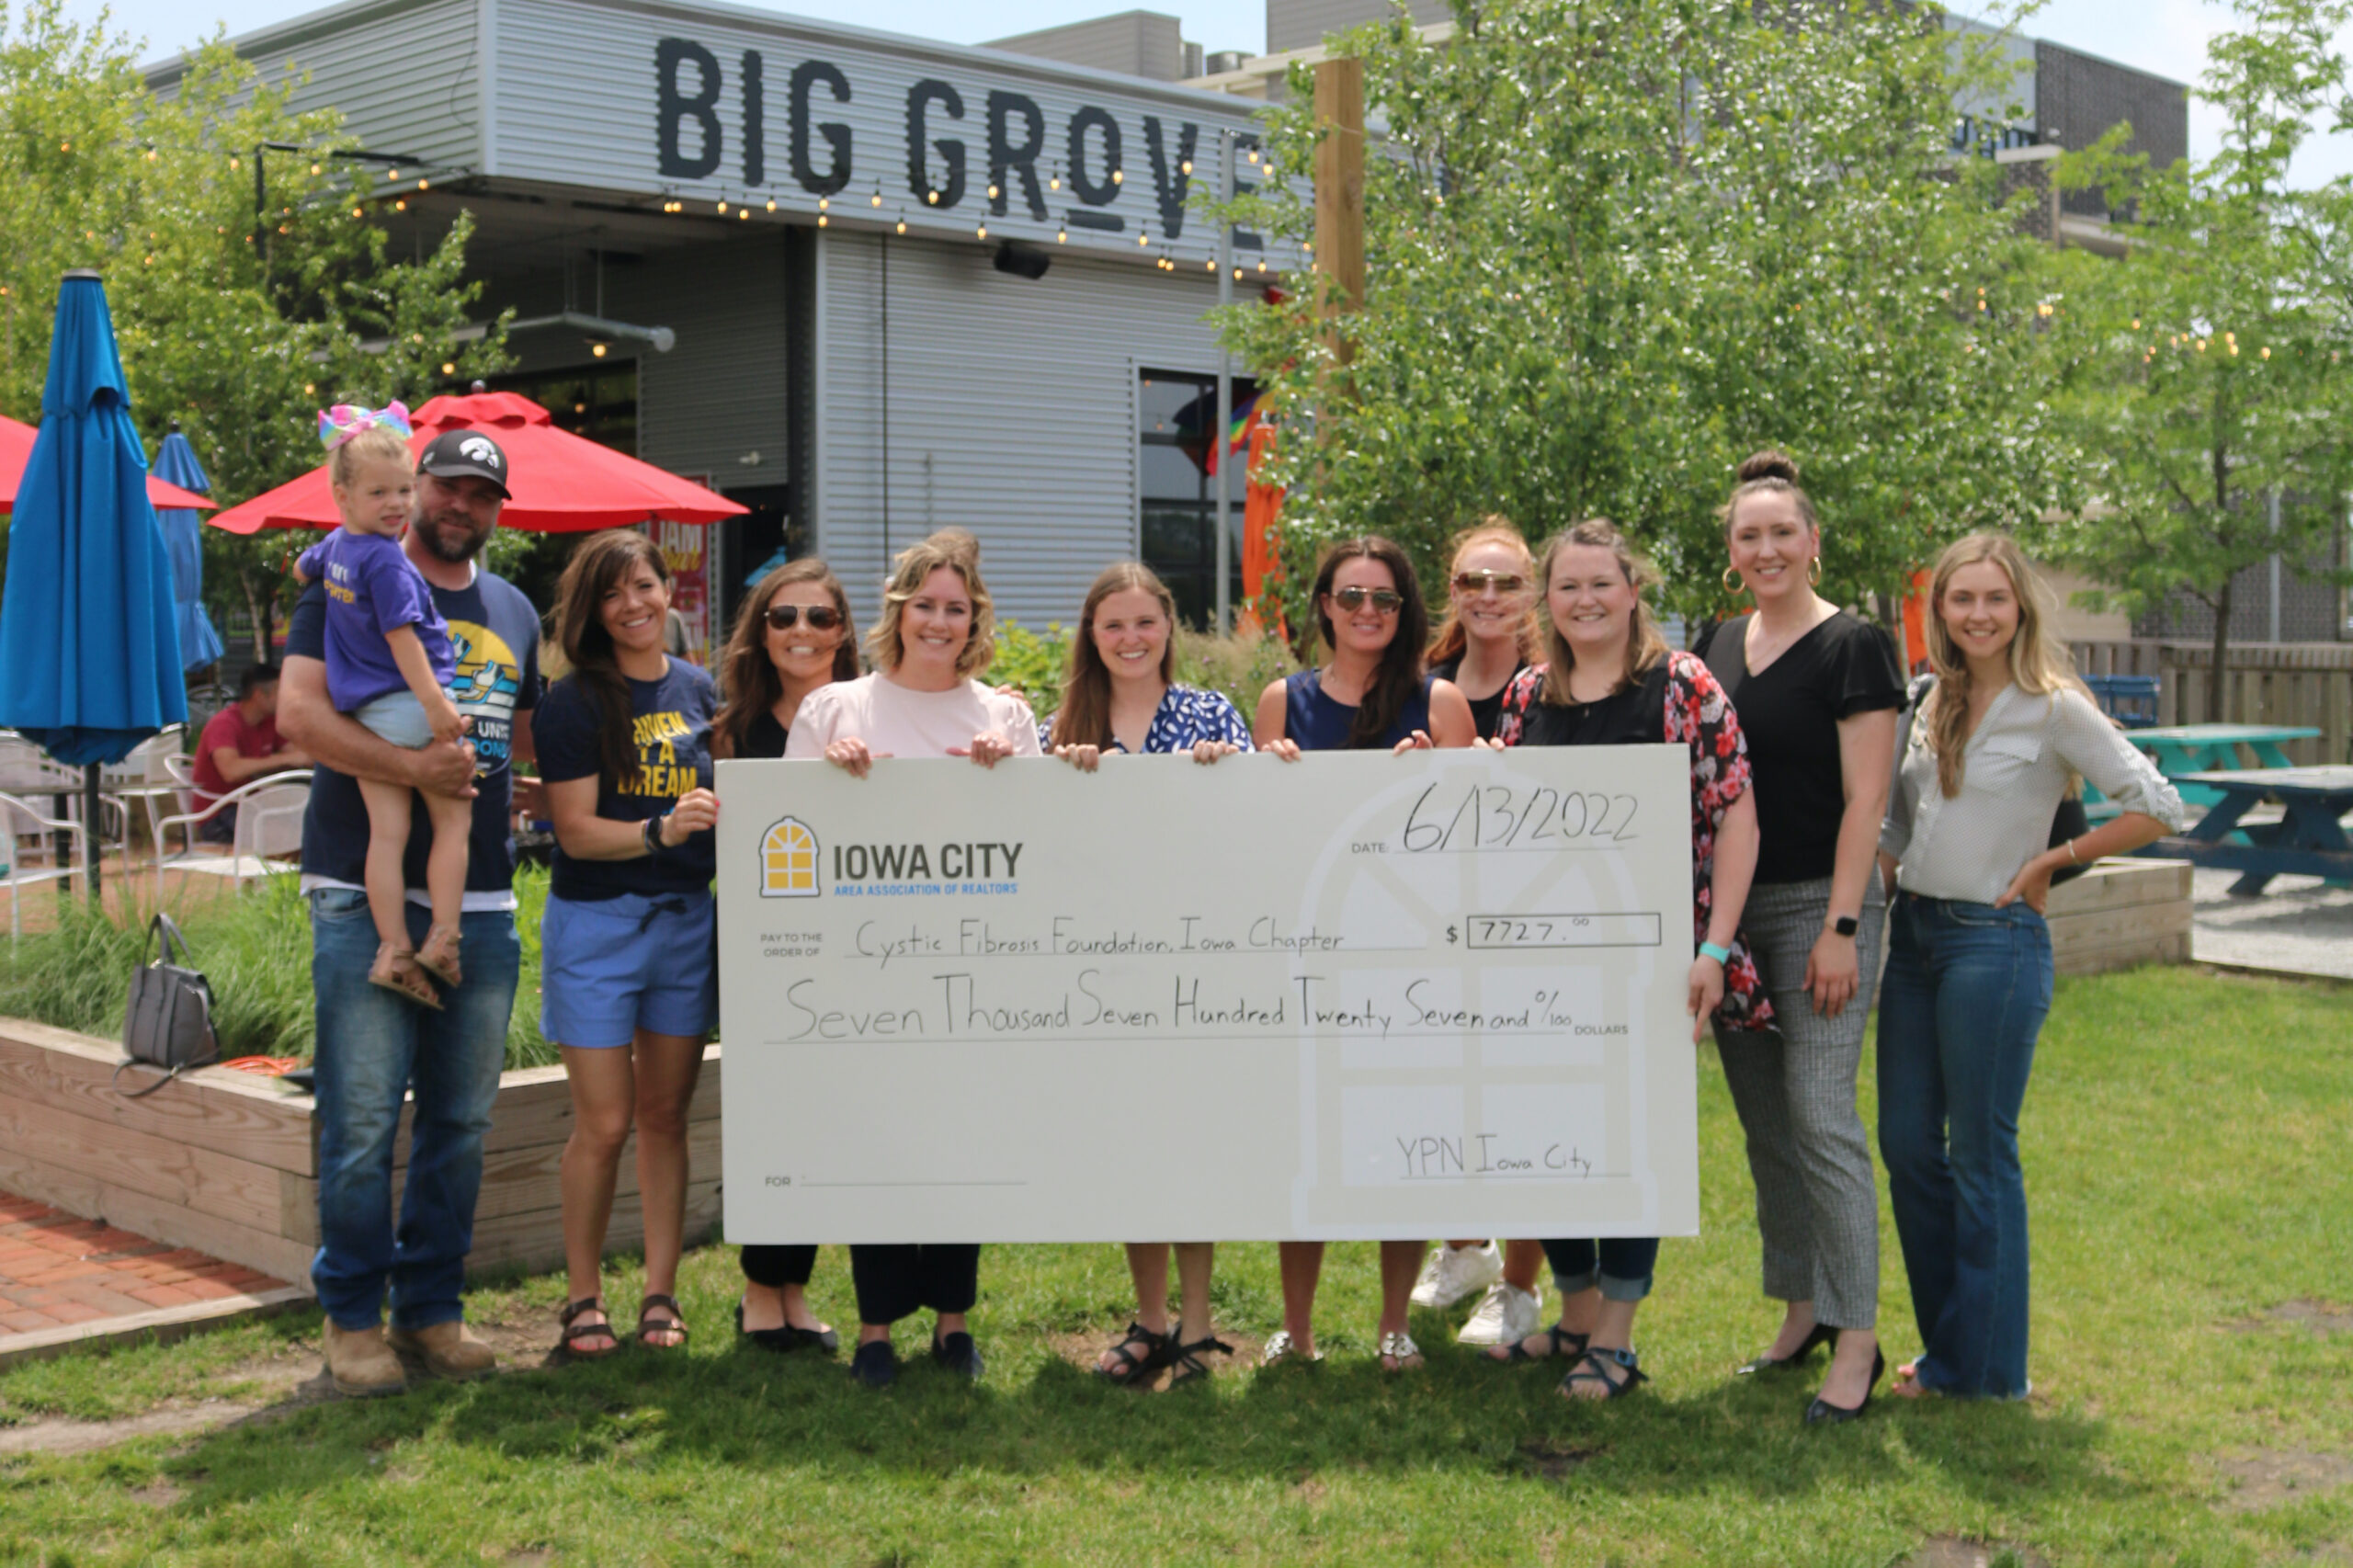 More than $7,000 was raised by the Iowa City Area Association of Realtors for the Iowa City chapter of the Cystic Fibrosis Foundation. outside Big Grove Brewery.